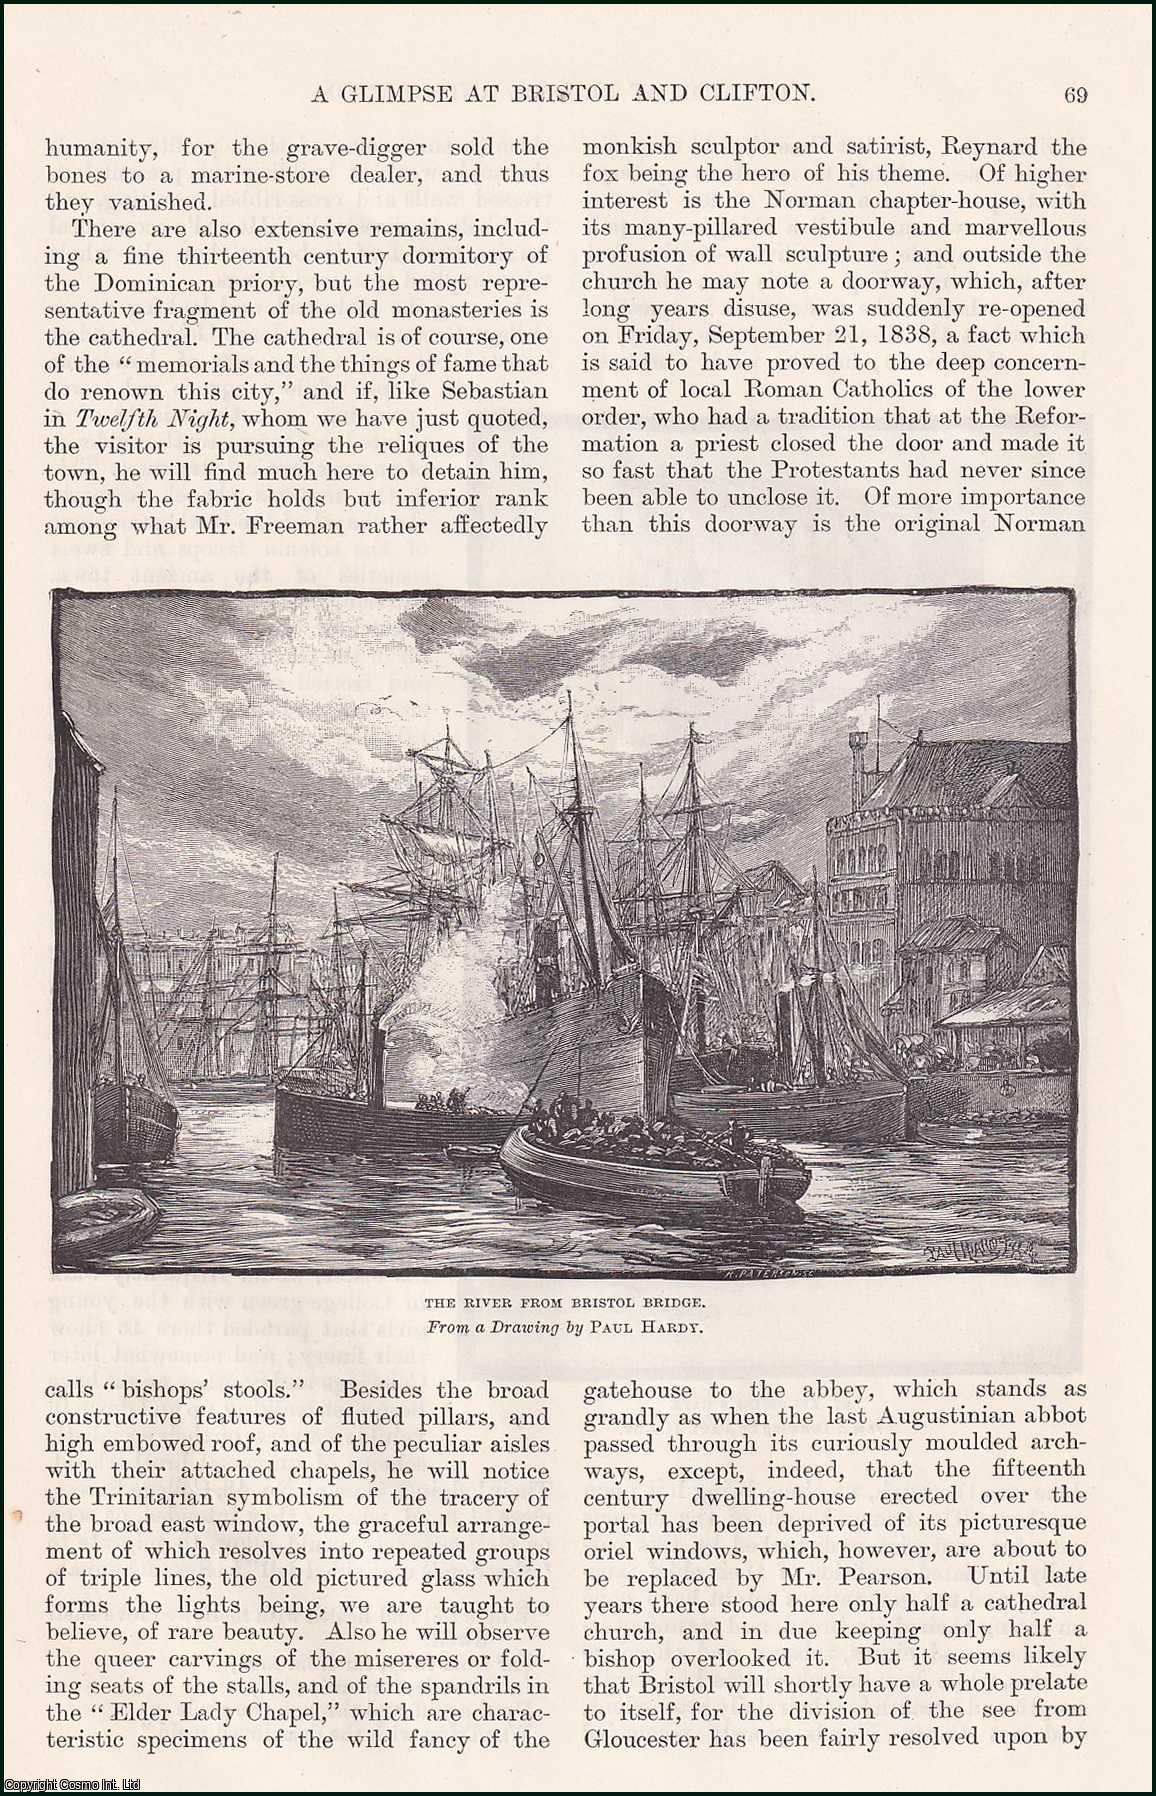 John Taylor, illustrations by Paul Hardy - A Glimpse at Bristol and Clifton. An original article from the English Illustrated Magazine, 1887.